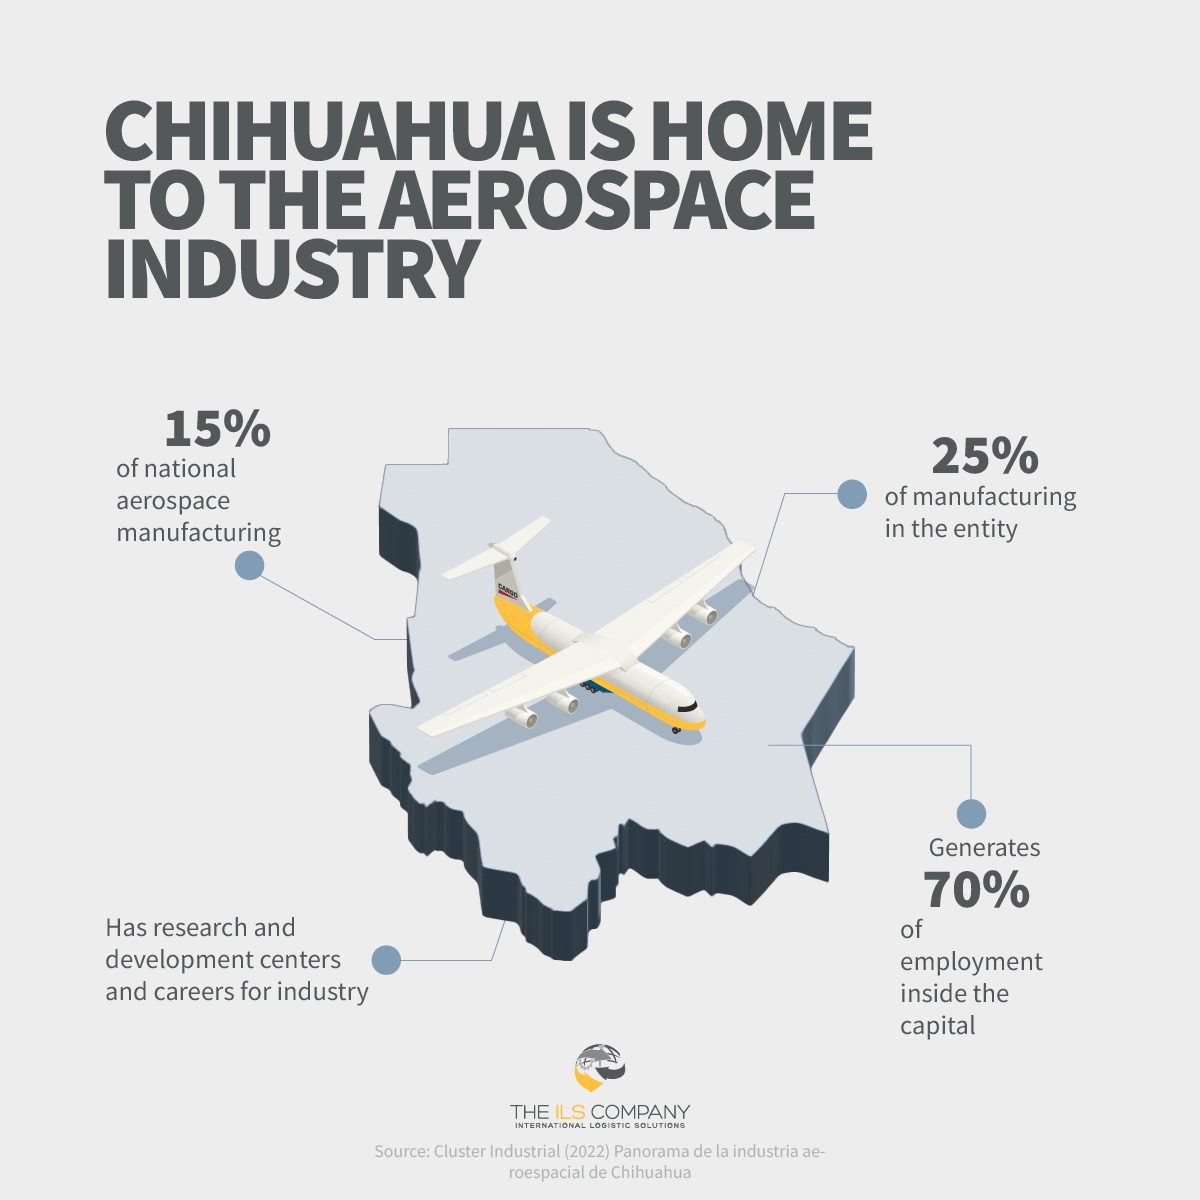 Data about the Aerospace industry in Chihuahua, Mexico